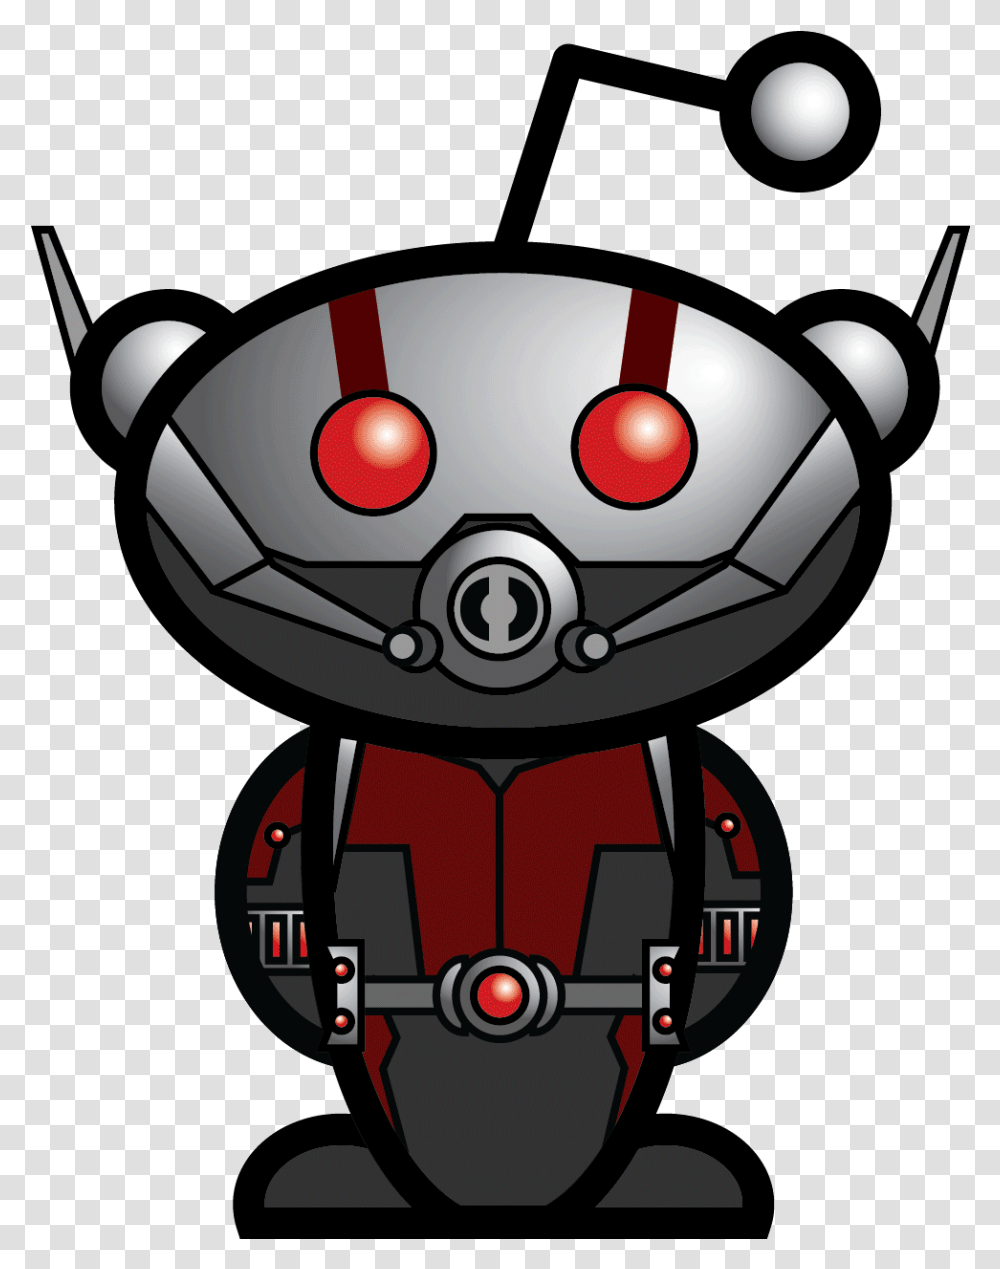 I Animated The New Ant Ant Man Cartoon Gif, Robot, Clock Tower, Wristwatch, Helmet Transparent Png